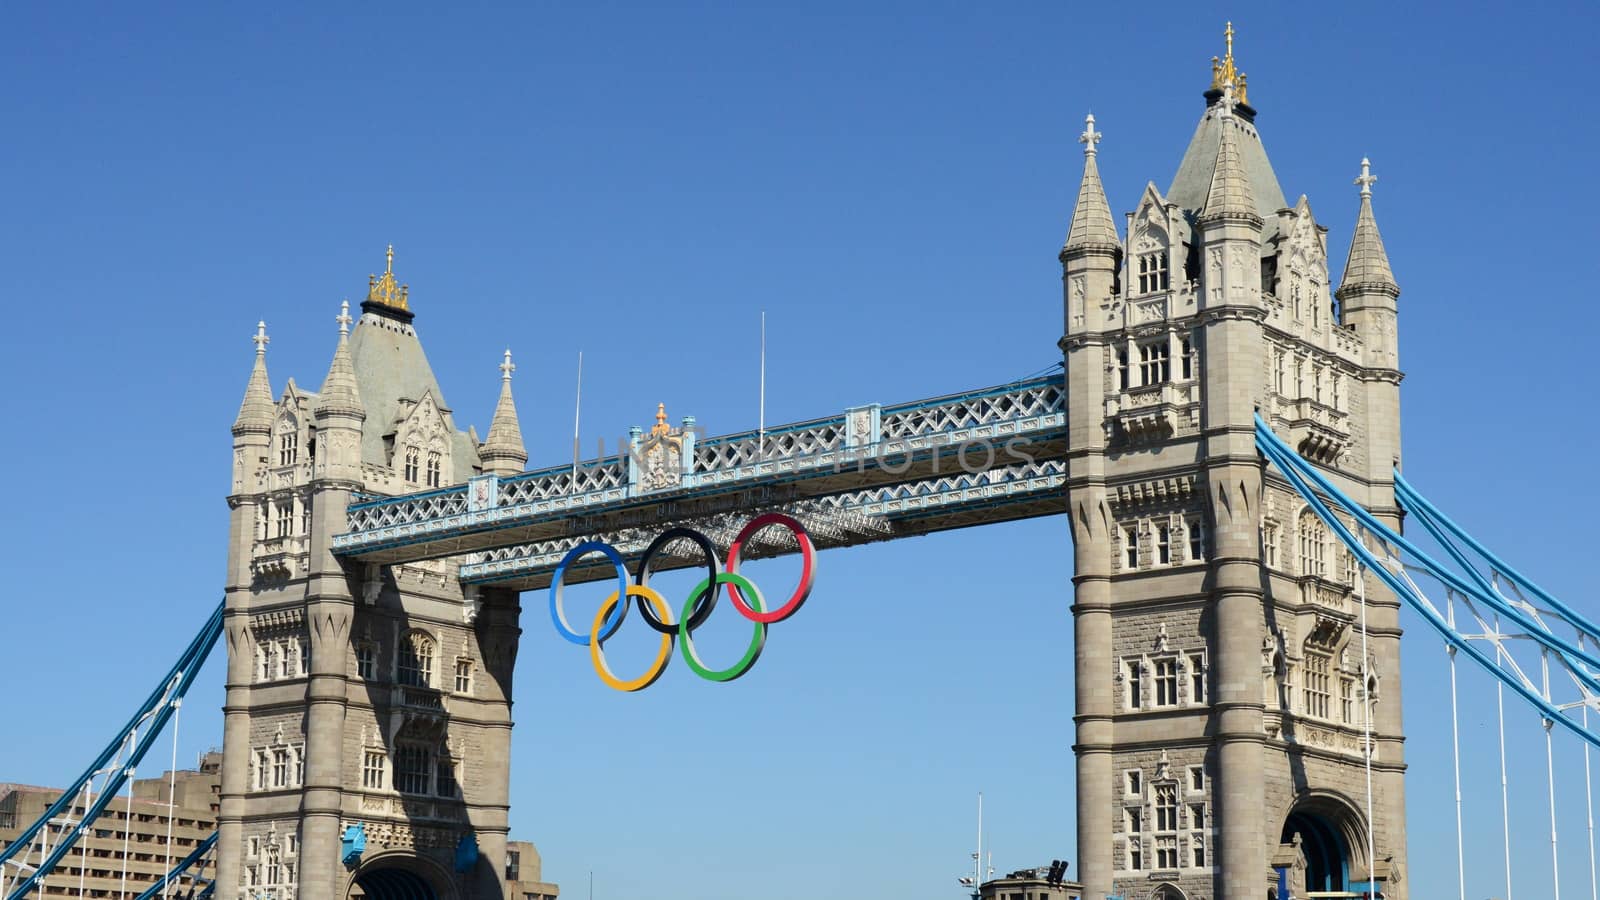 Tower bridge on river thames with Olympic rings for 2012 Olympics in london